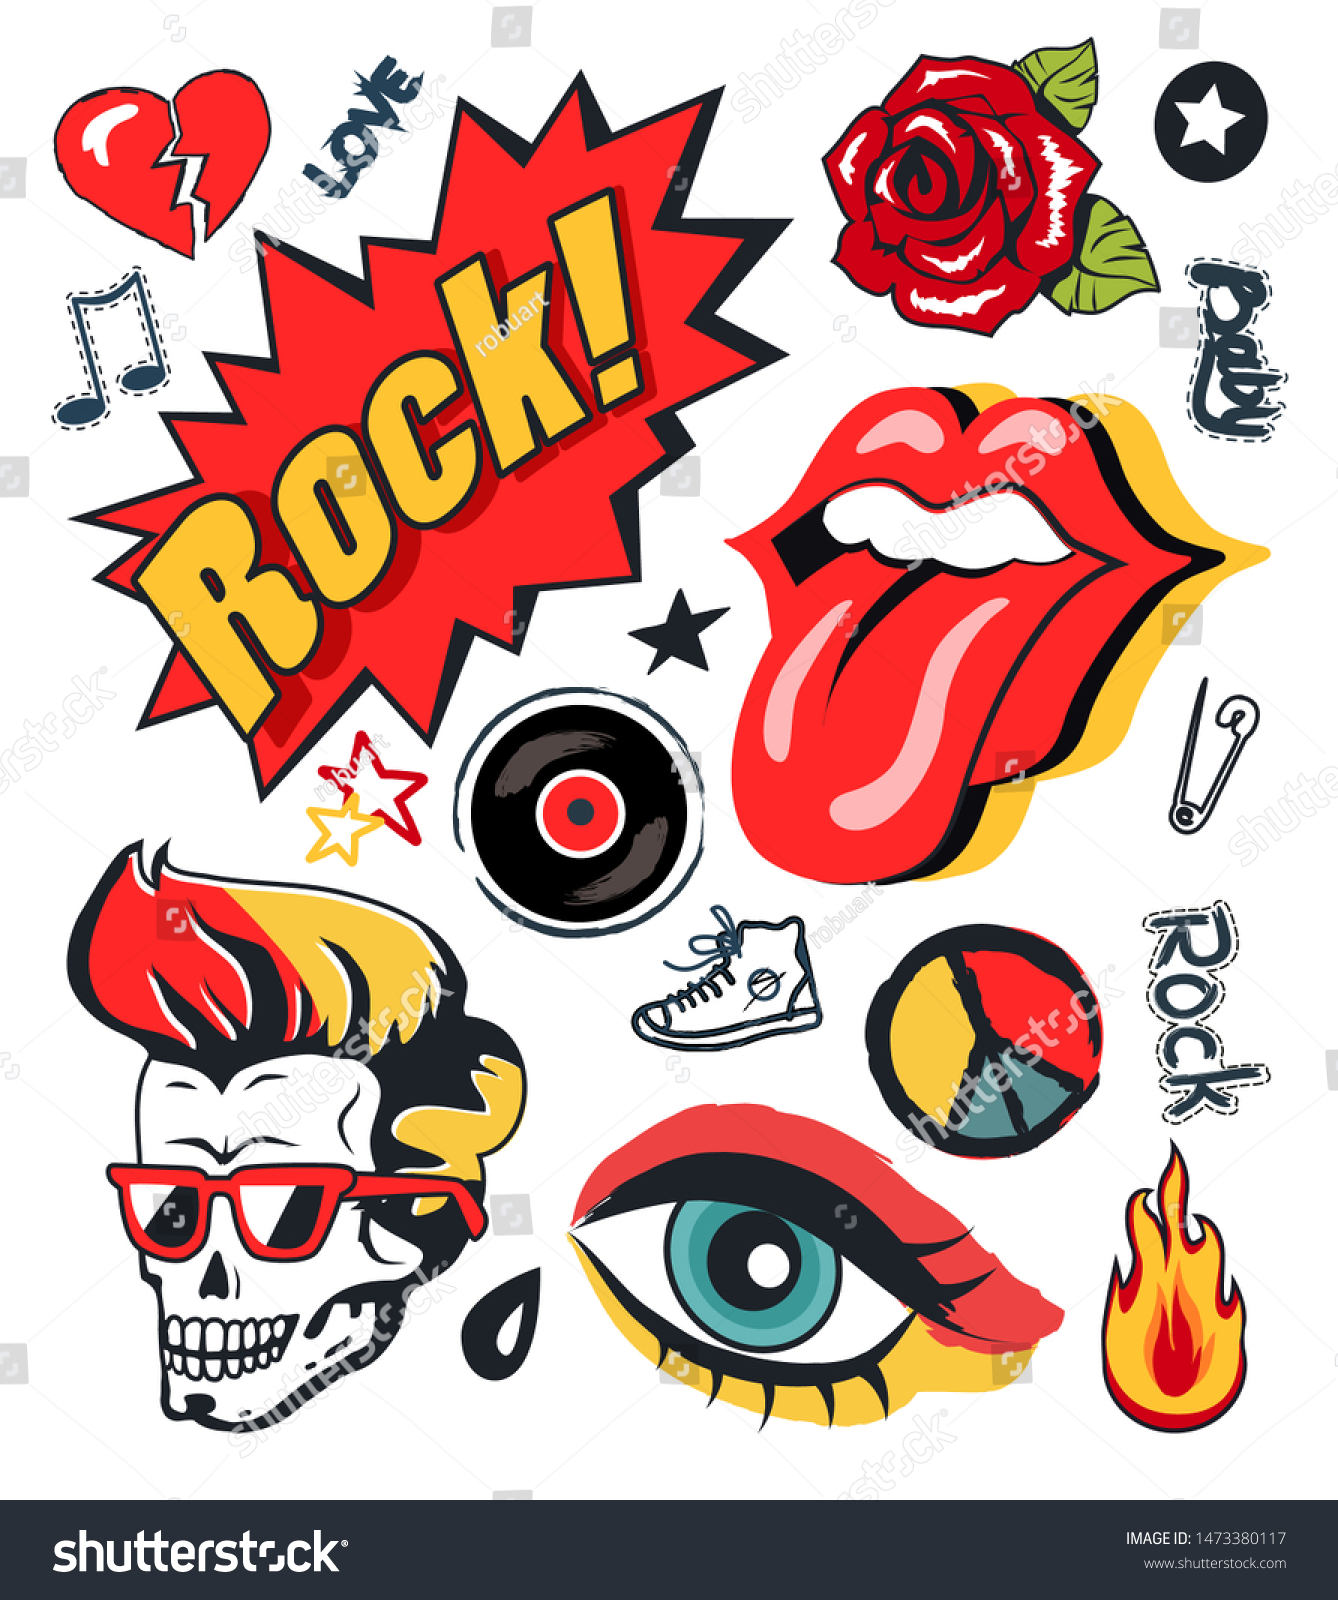 Rock n roll stickers set Royalty Free Vector Image